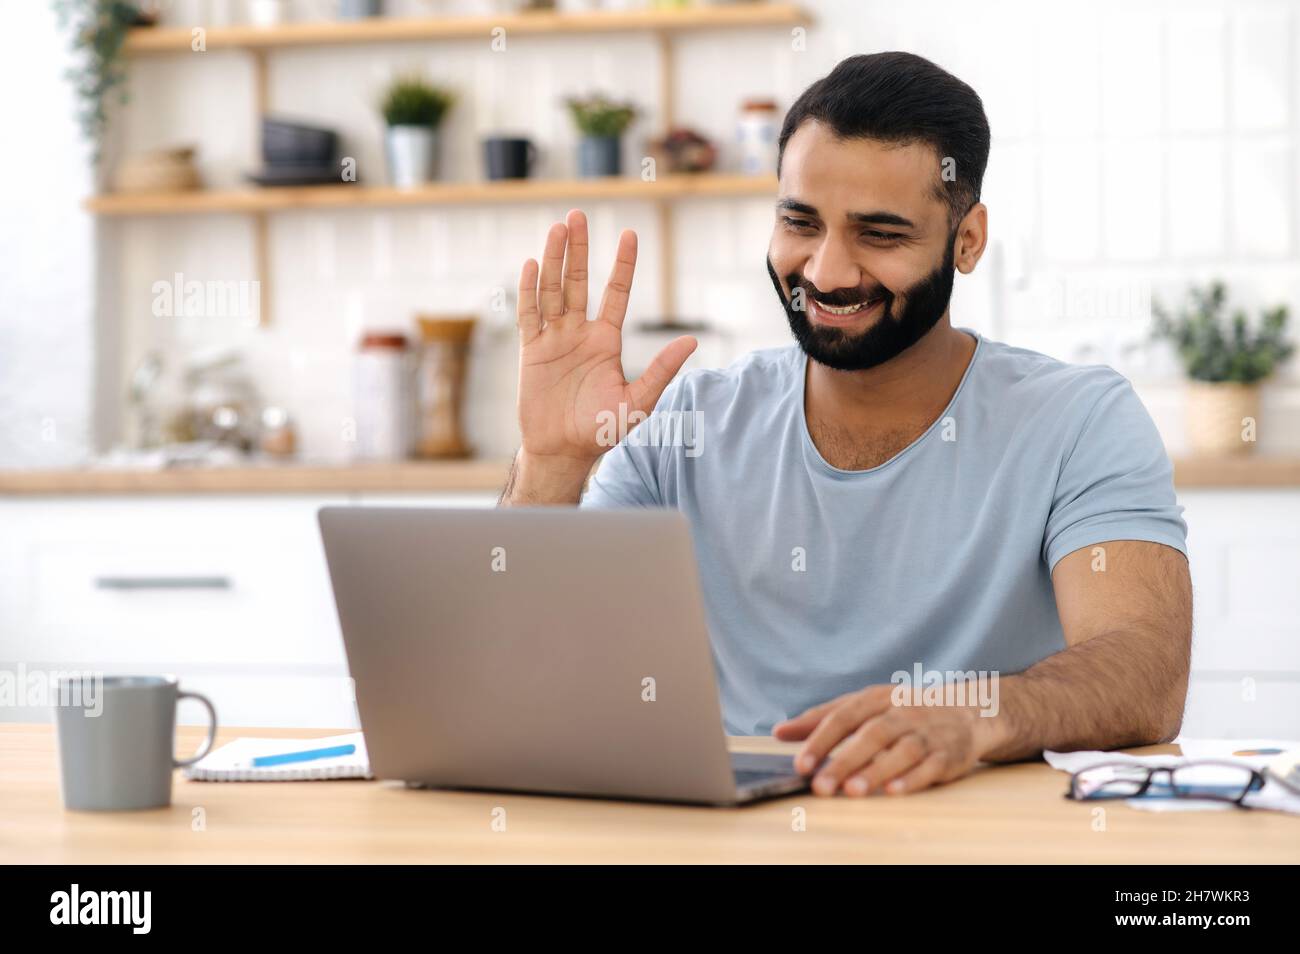 Video conference, distant communication. Positive Indian man, freelancer, designer or manager, work from home, using a laptop for communication via video call, talking to a colleague or friend, smiles Stock Photo